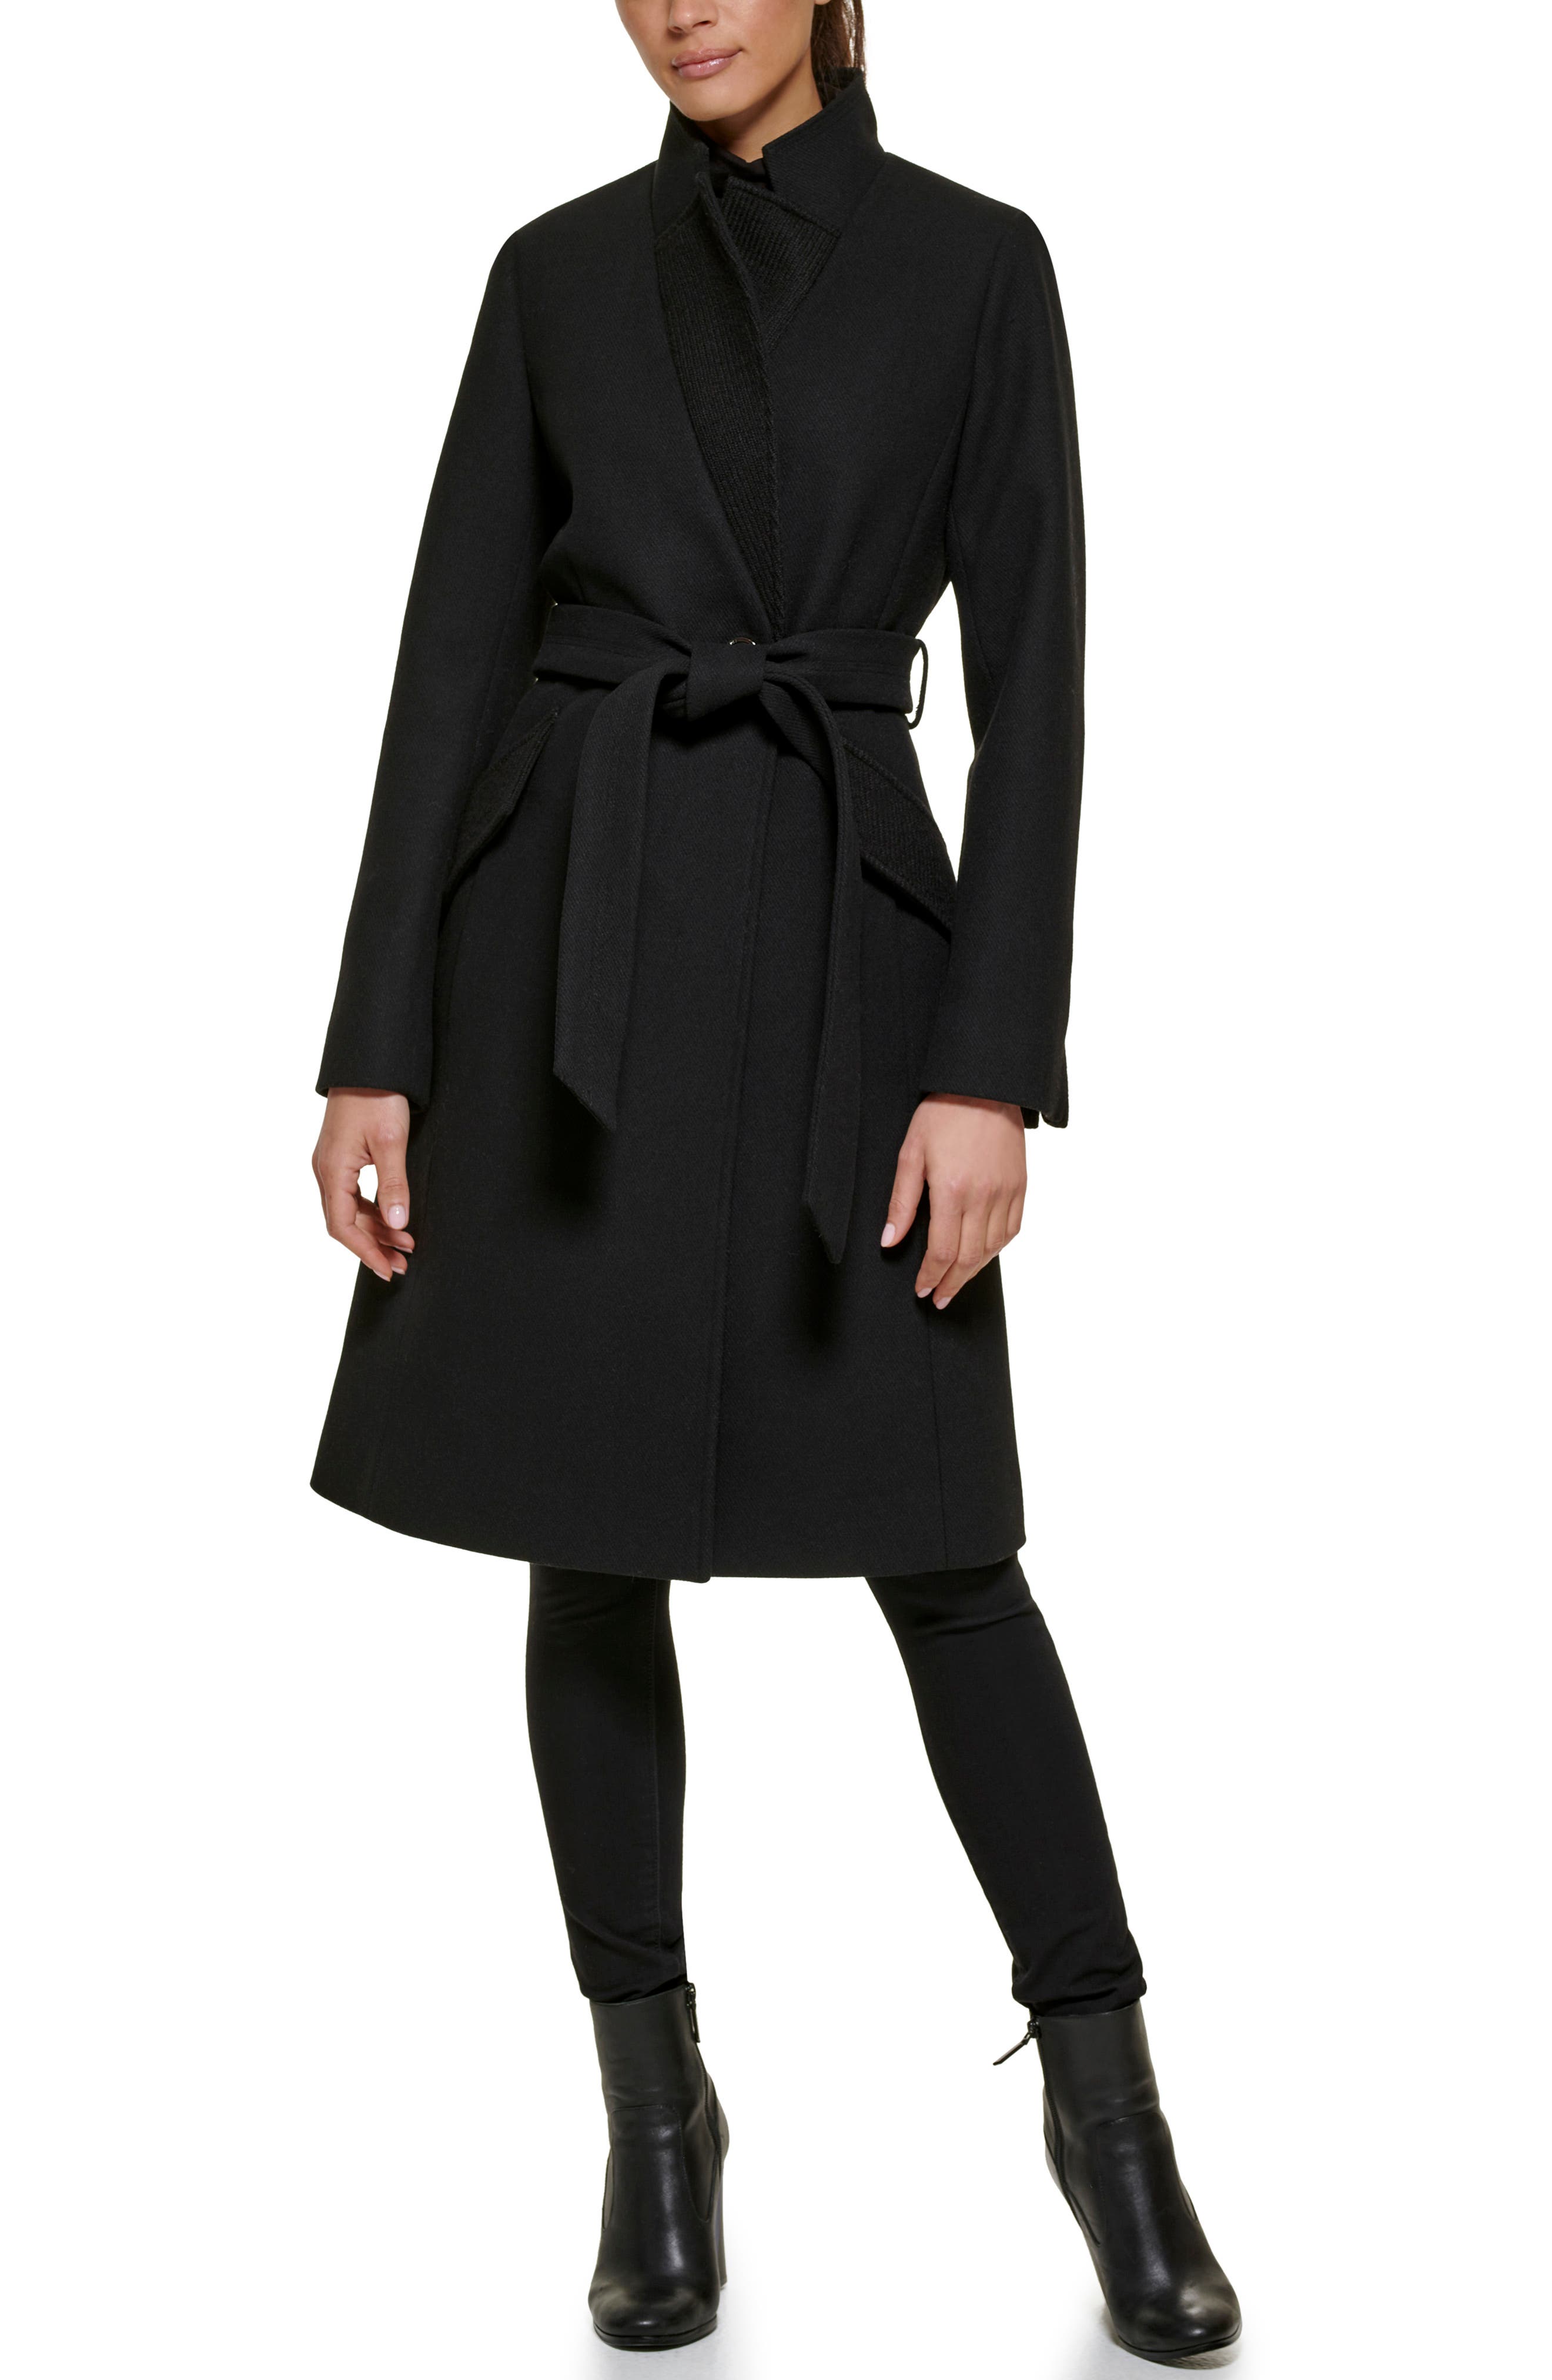 Kenneth Cole Updated Fencer Collar Medium Wool-blend Coat in Black Save 1% Womens Coats Kenneth Cole Coats 